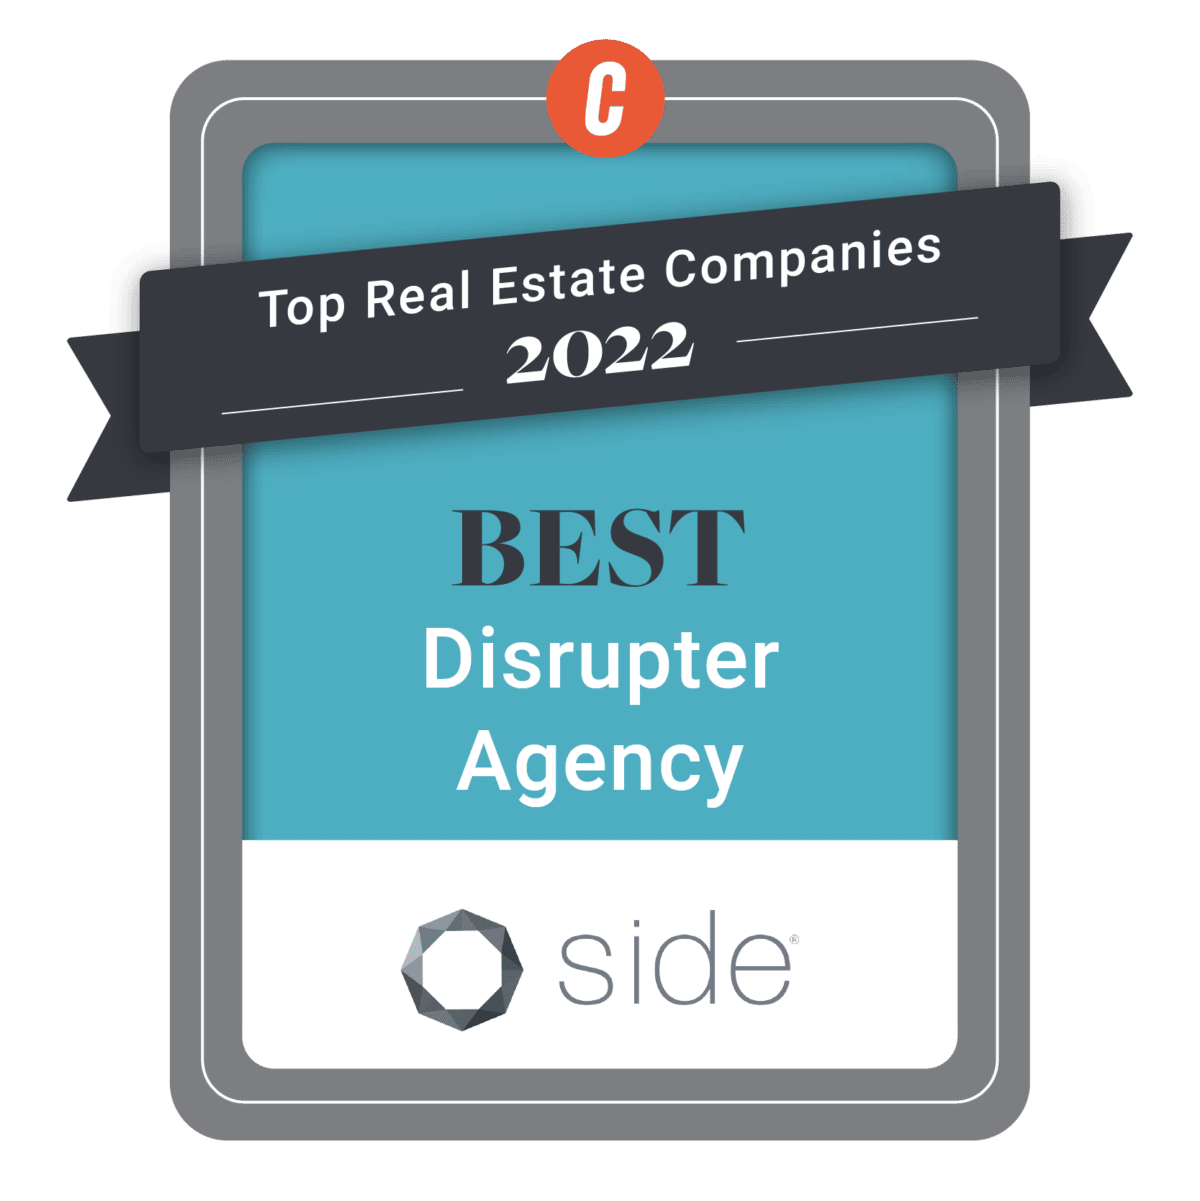 Graphic Award for top real estate Companies 2022